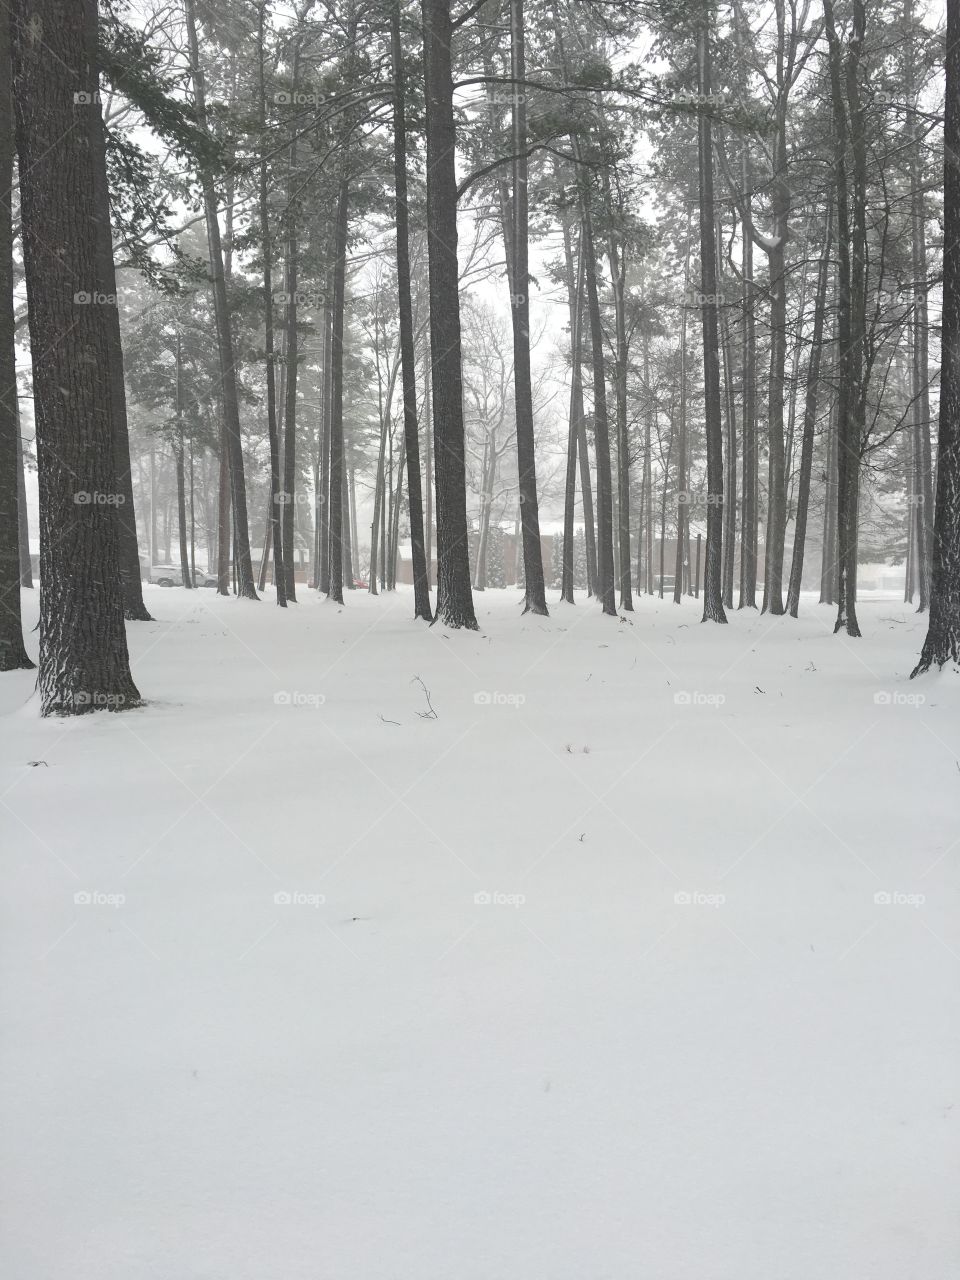 Winter in the pines